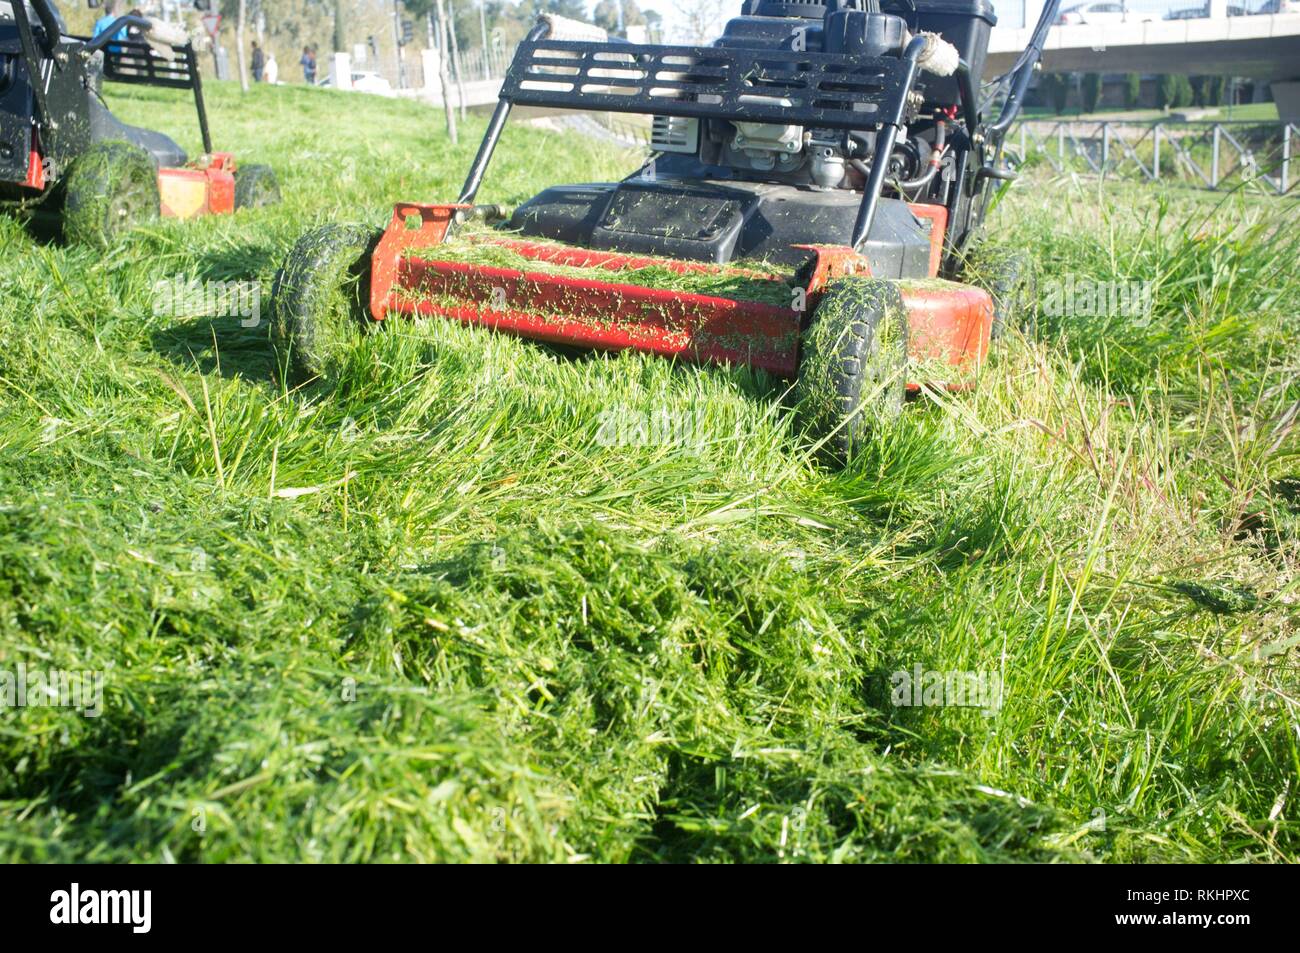 Heap of green grass new-mown with two lawn mowers behind. Focus on machine. Stock Photo